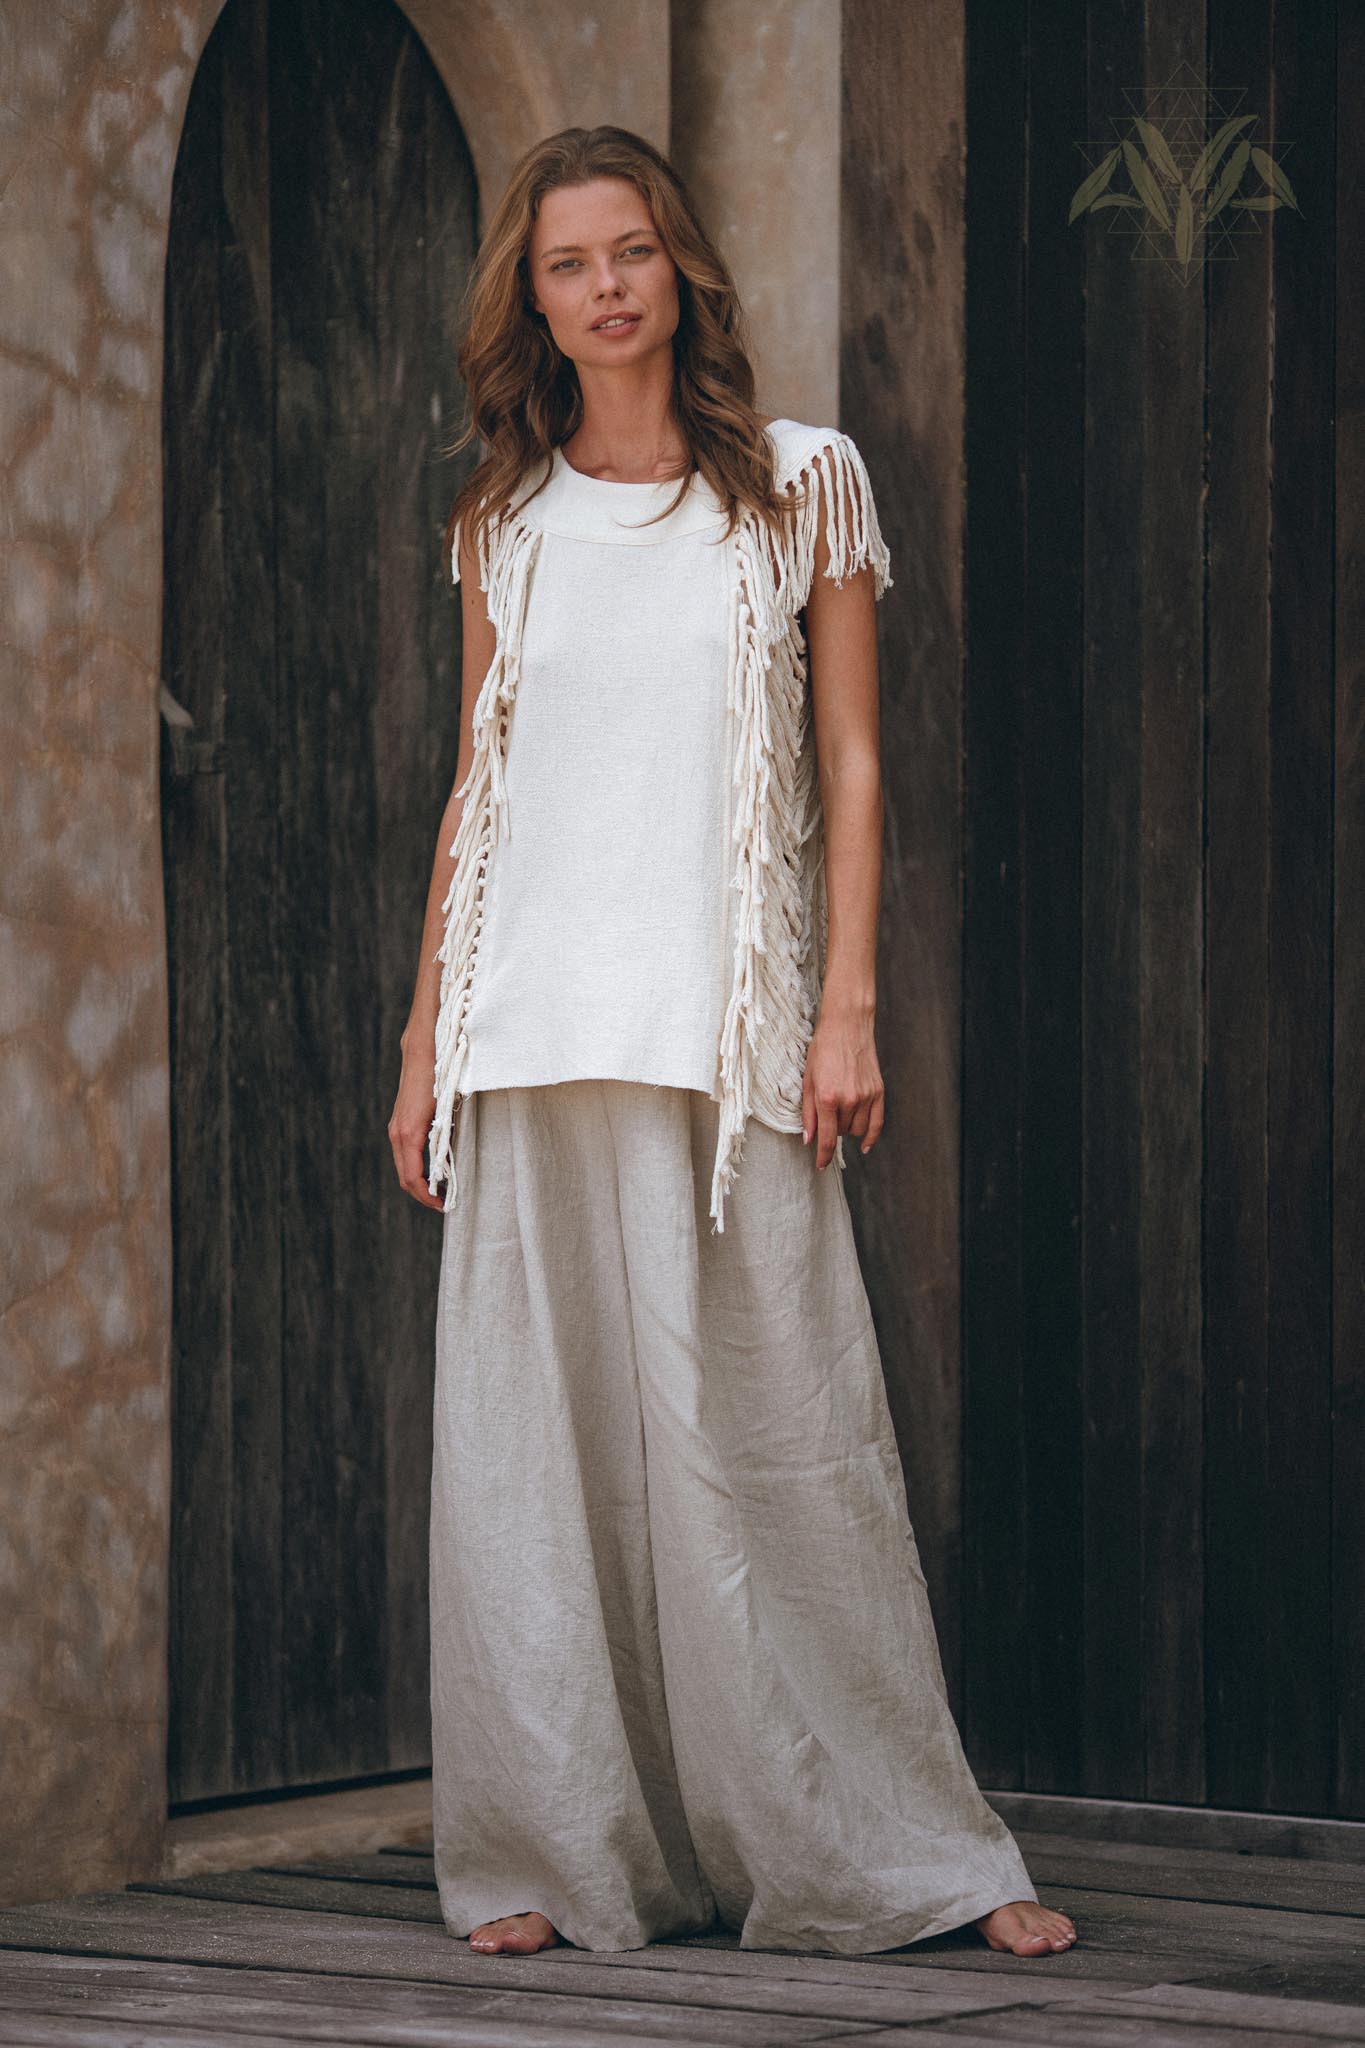 Off-White Bohemian Top with Tassels Sides - AYA Sacred Wear